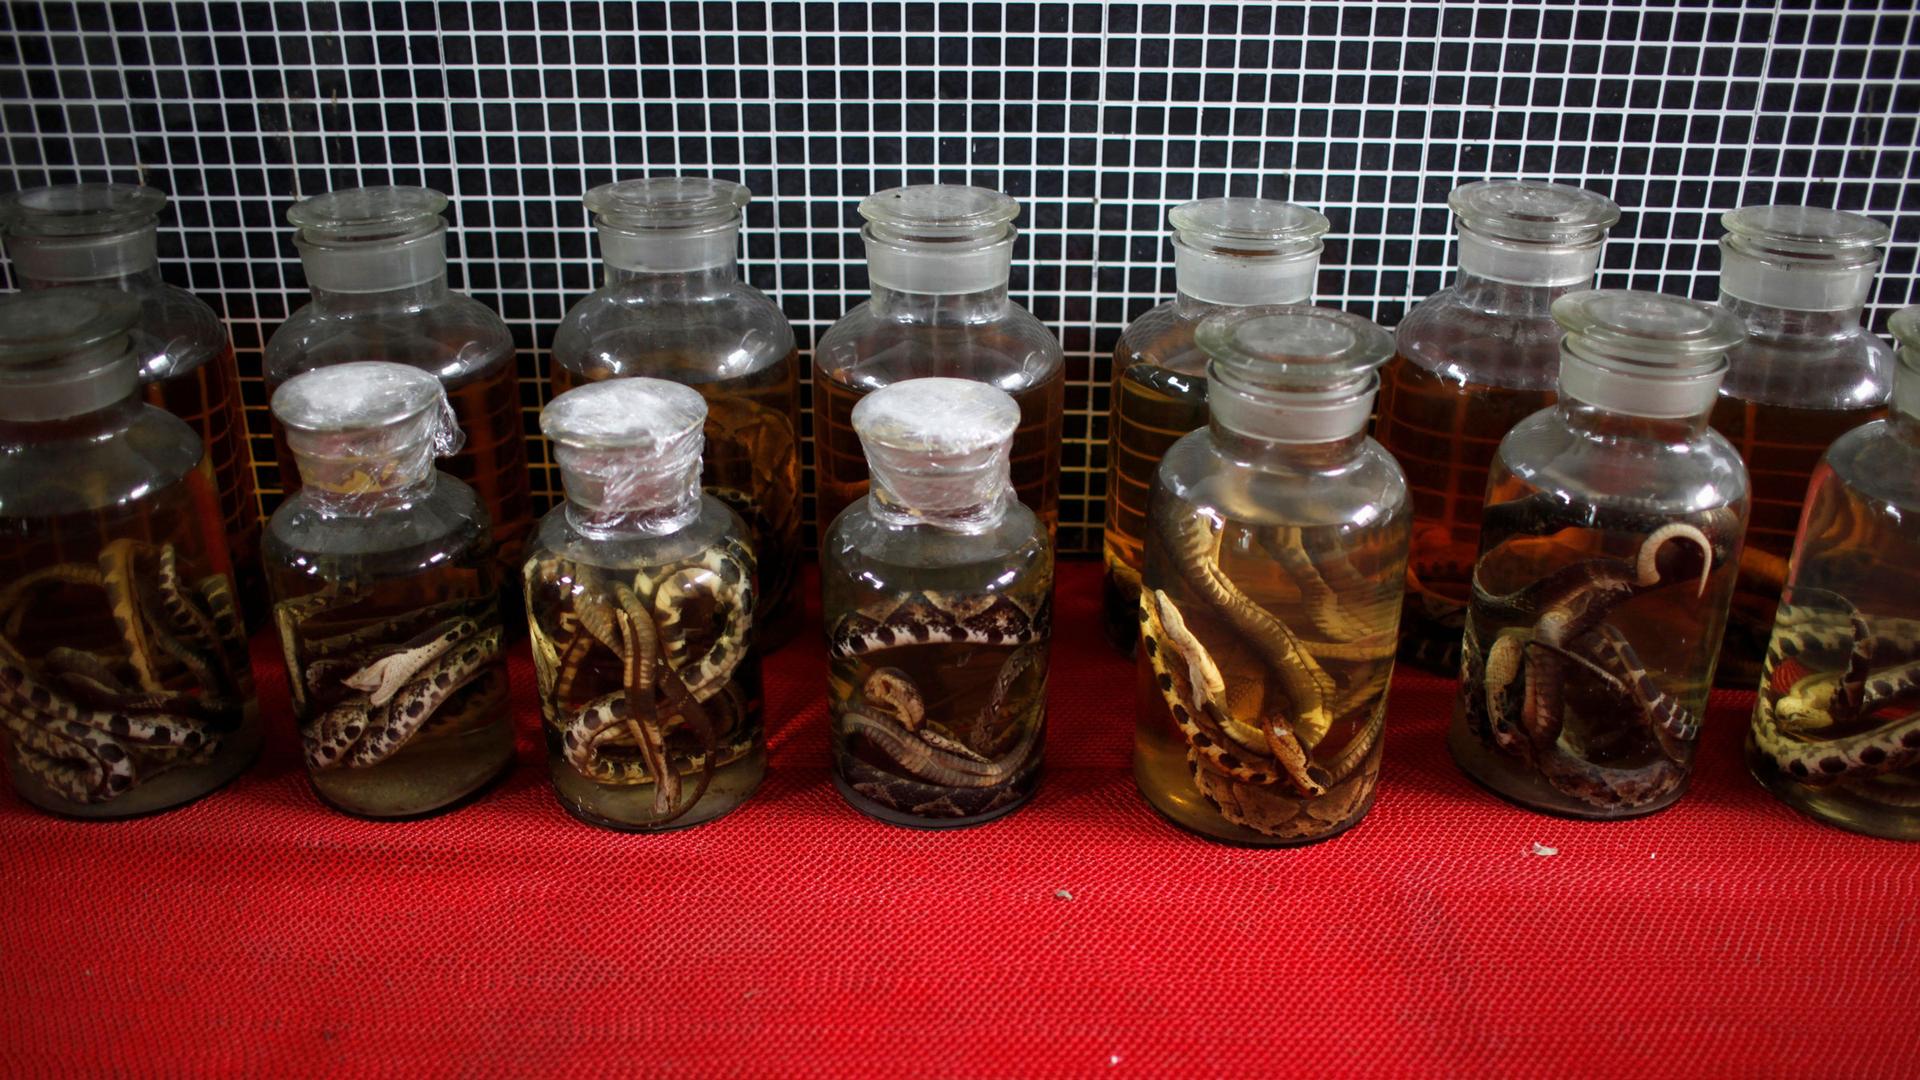 Dead snakes are preserved in jars at a snake farm in Zisiqiao village, Zhejiang province, China, on Feb. 22, 2013. 